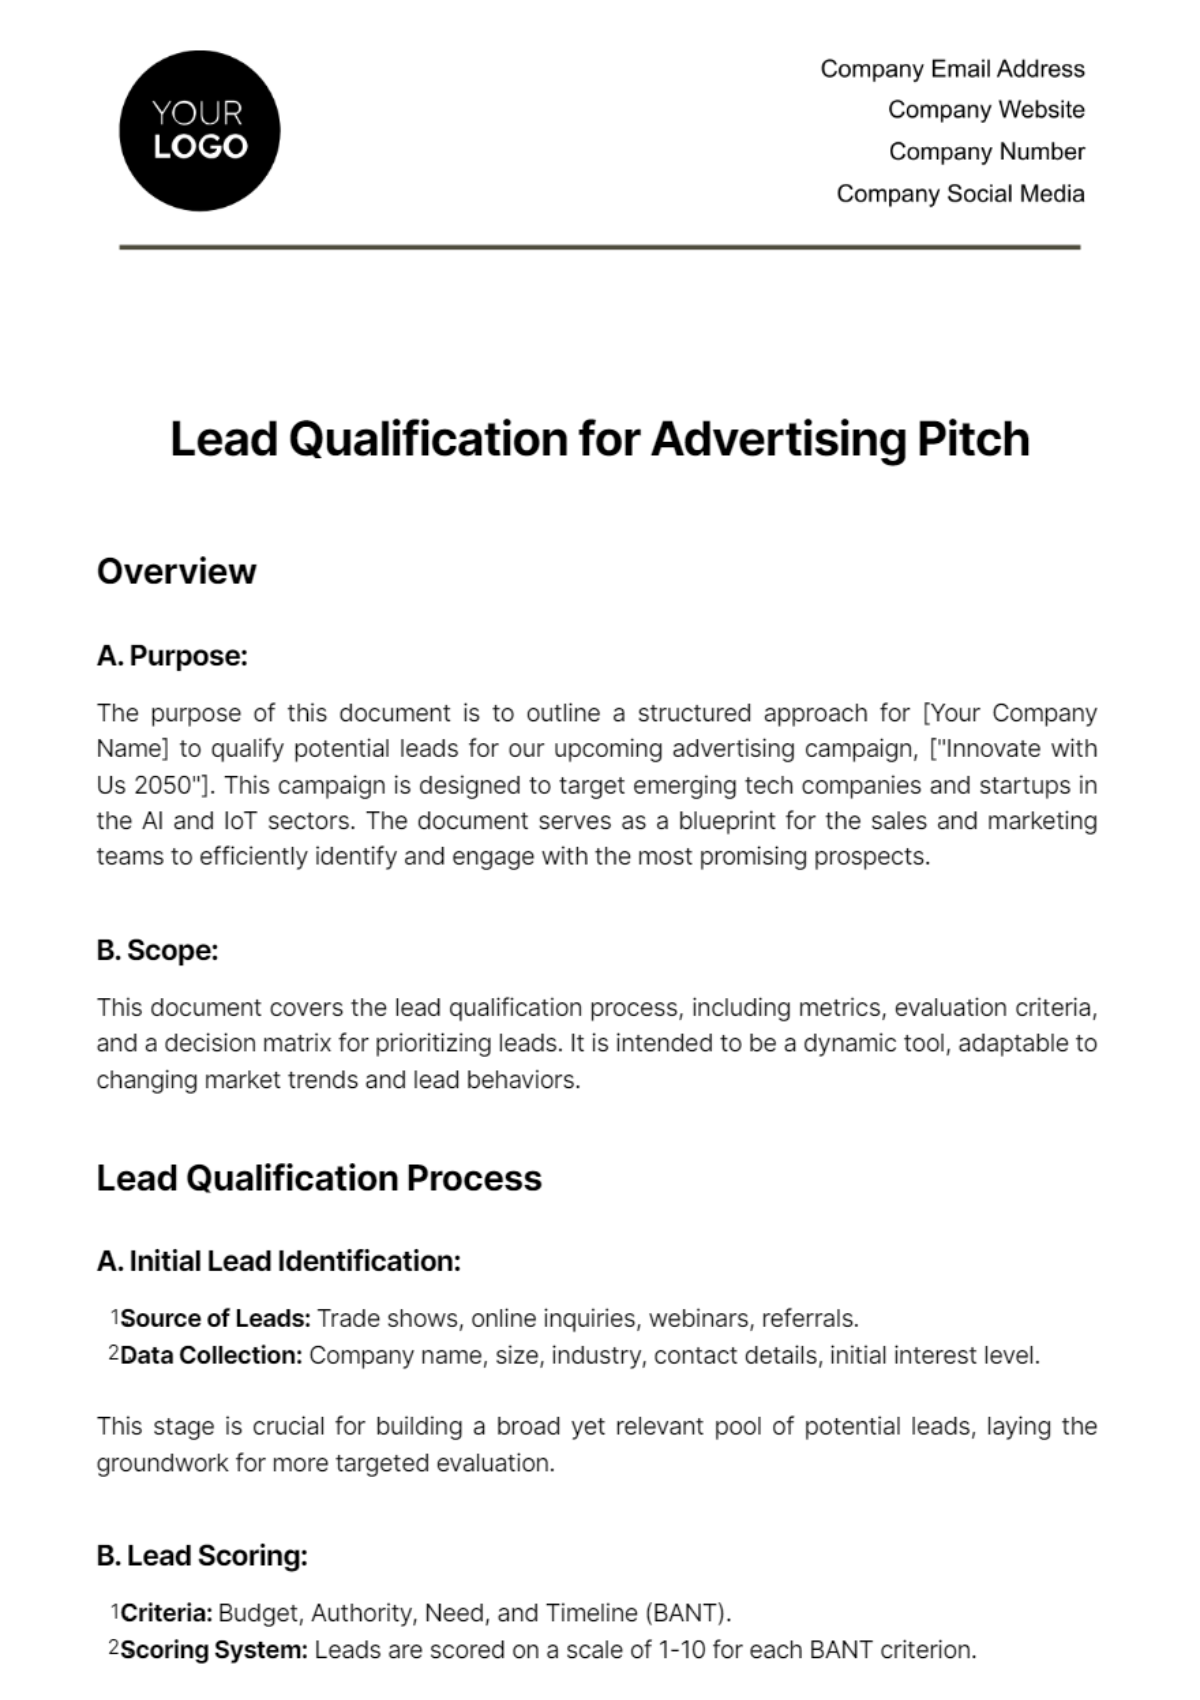 Free Lead Qualification for Advertising Pitch Template